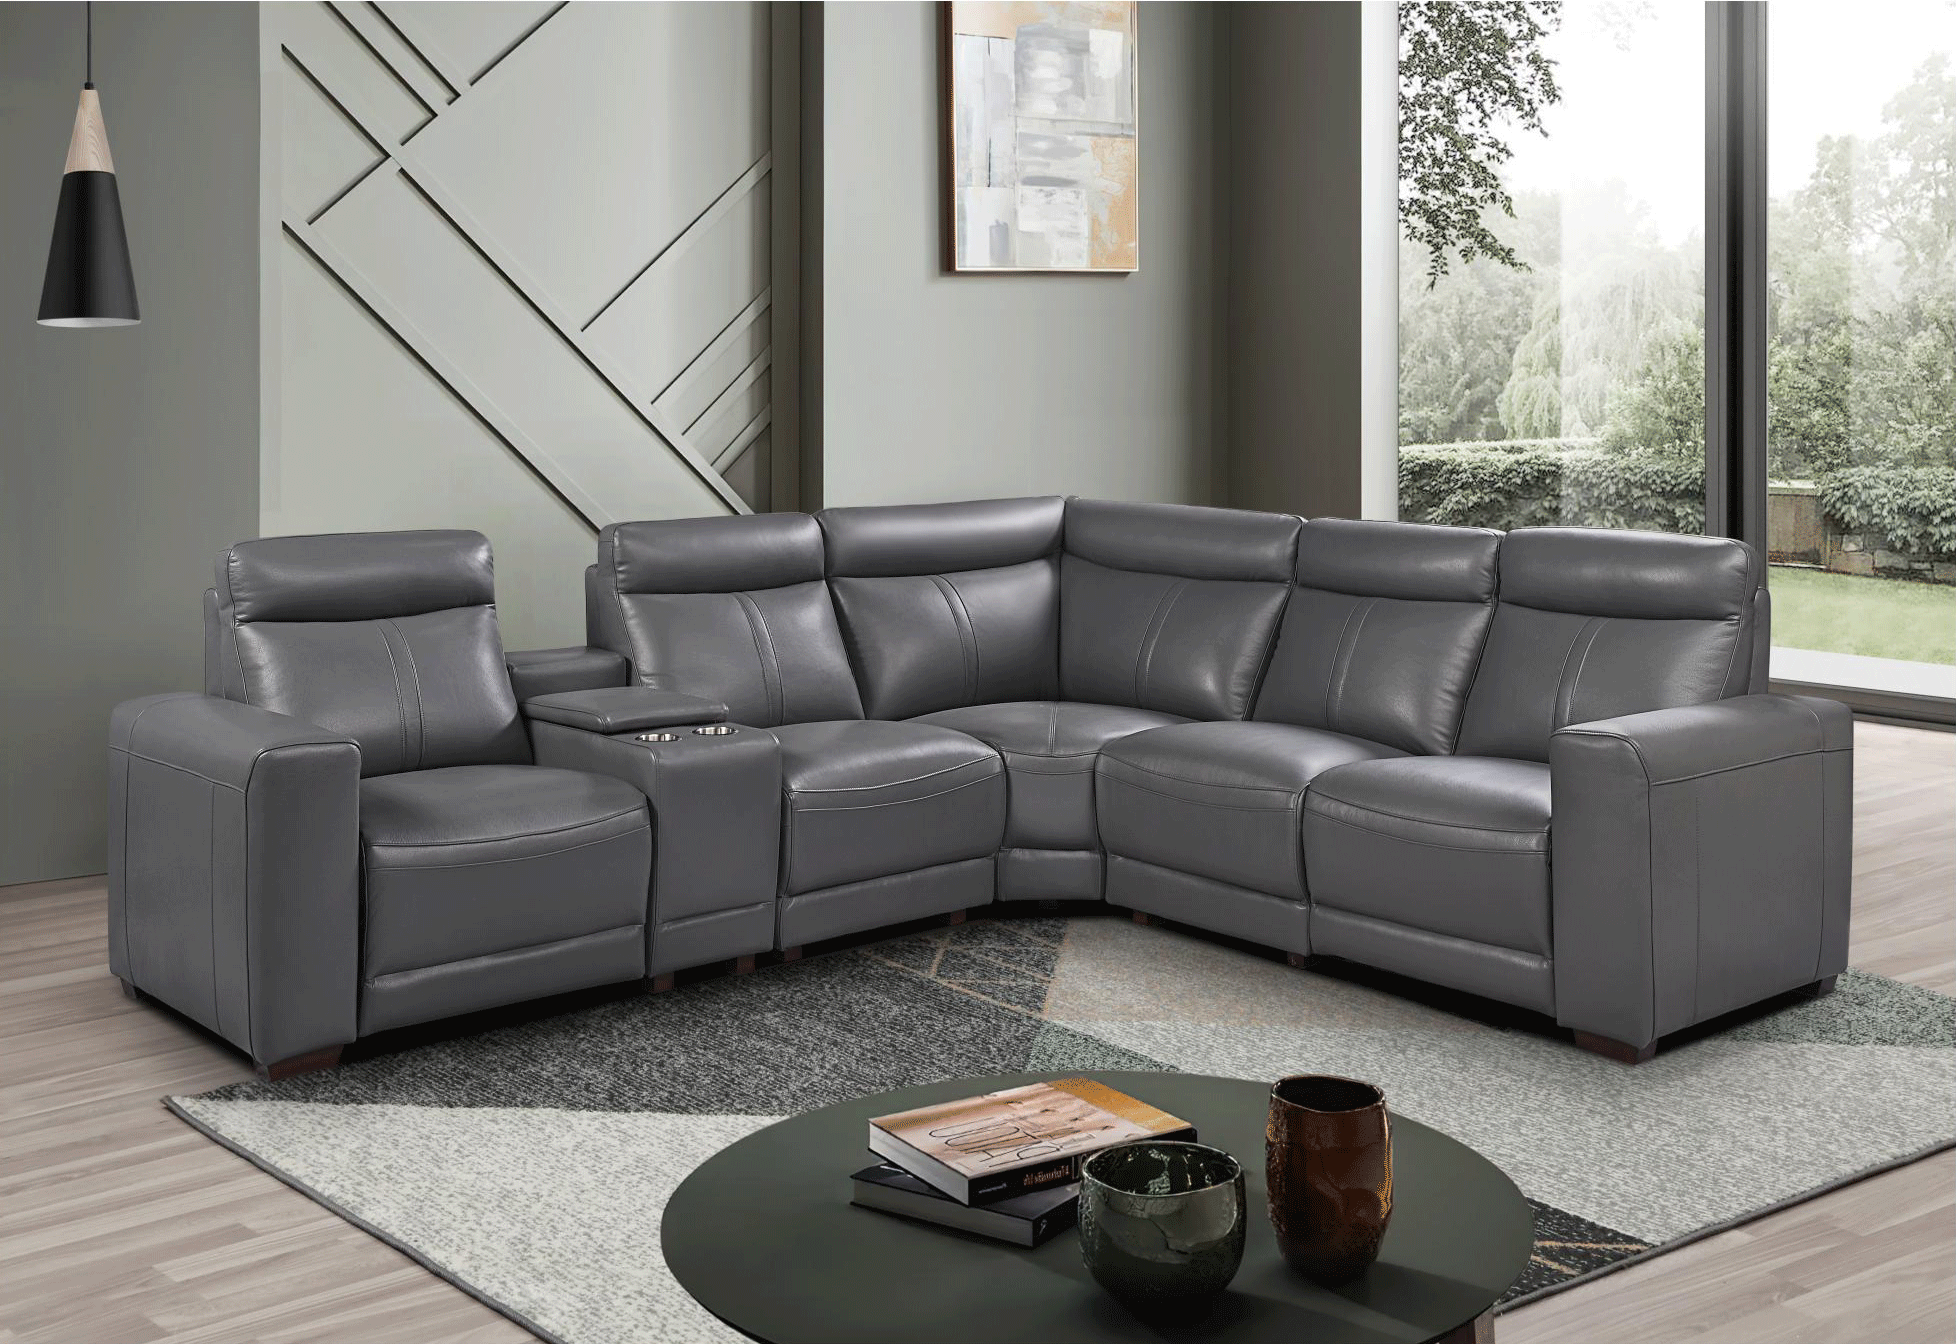 Living Room Furniture Coffee and End Tables 2777 Sectional w/ recliners